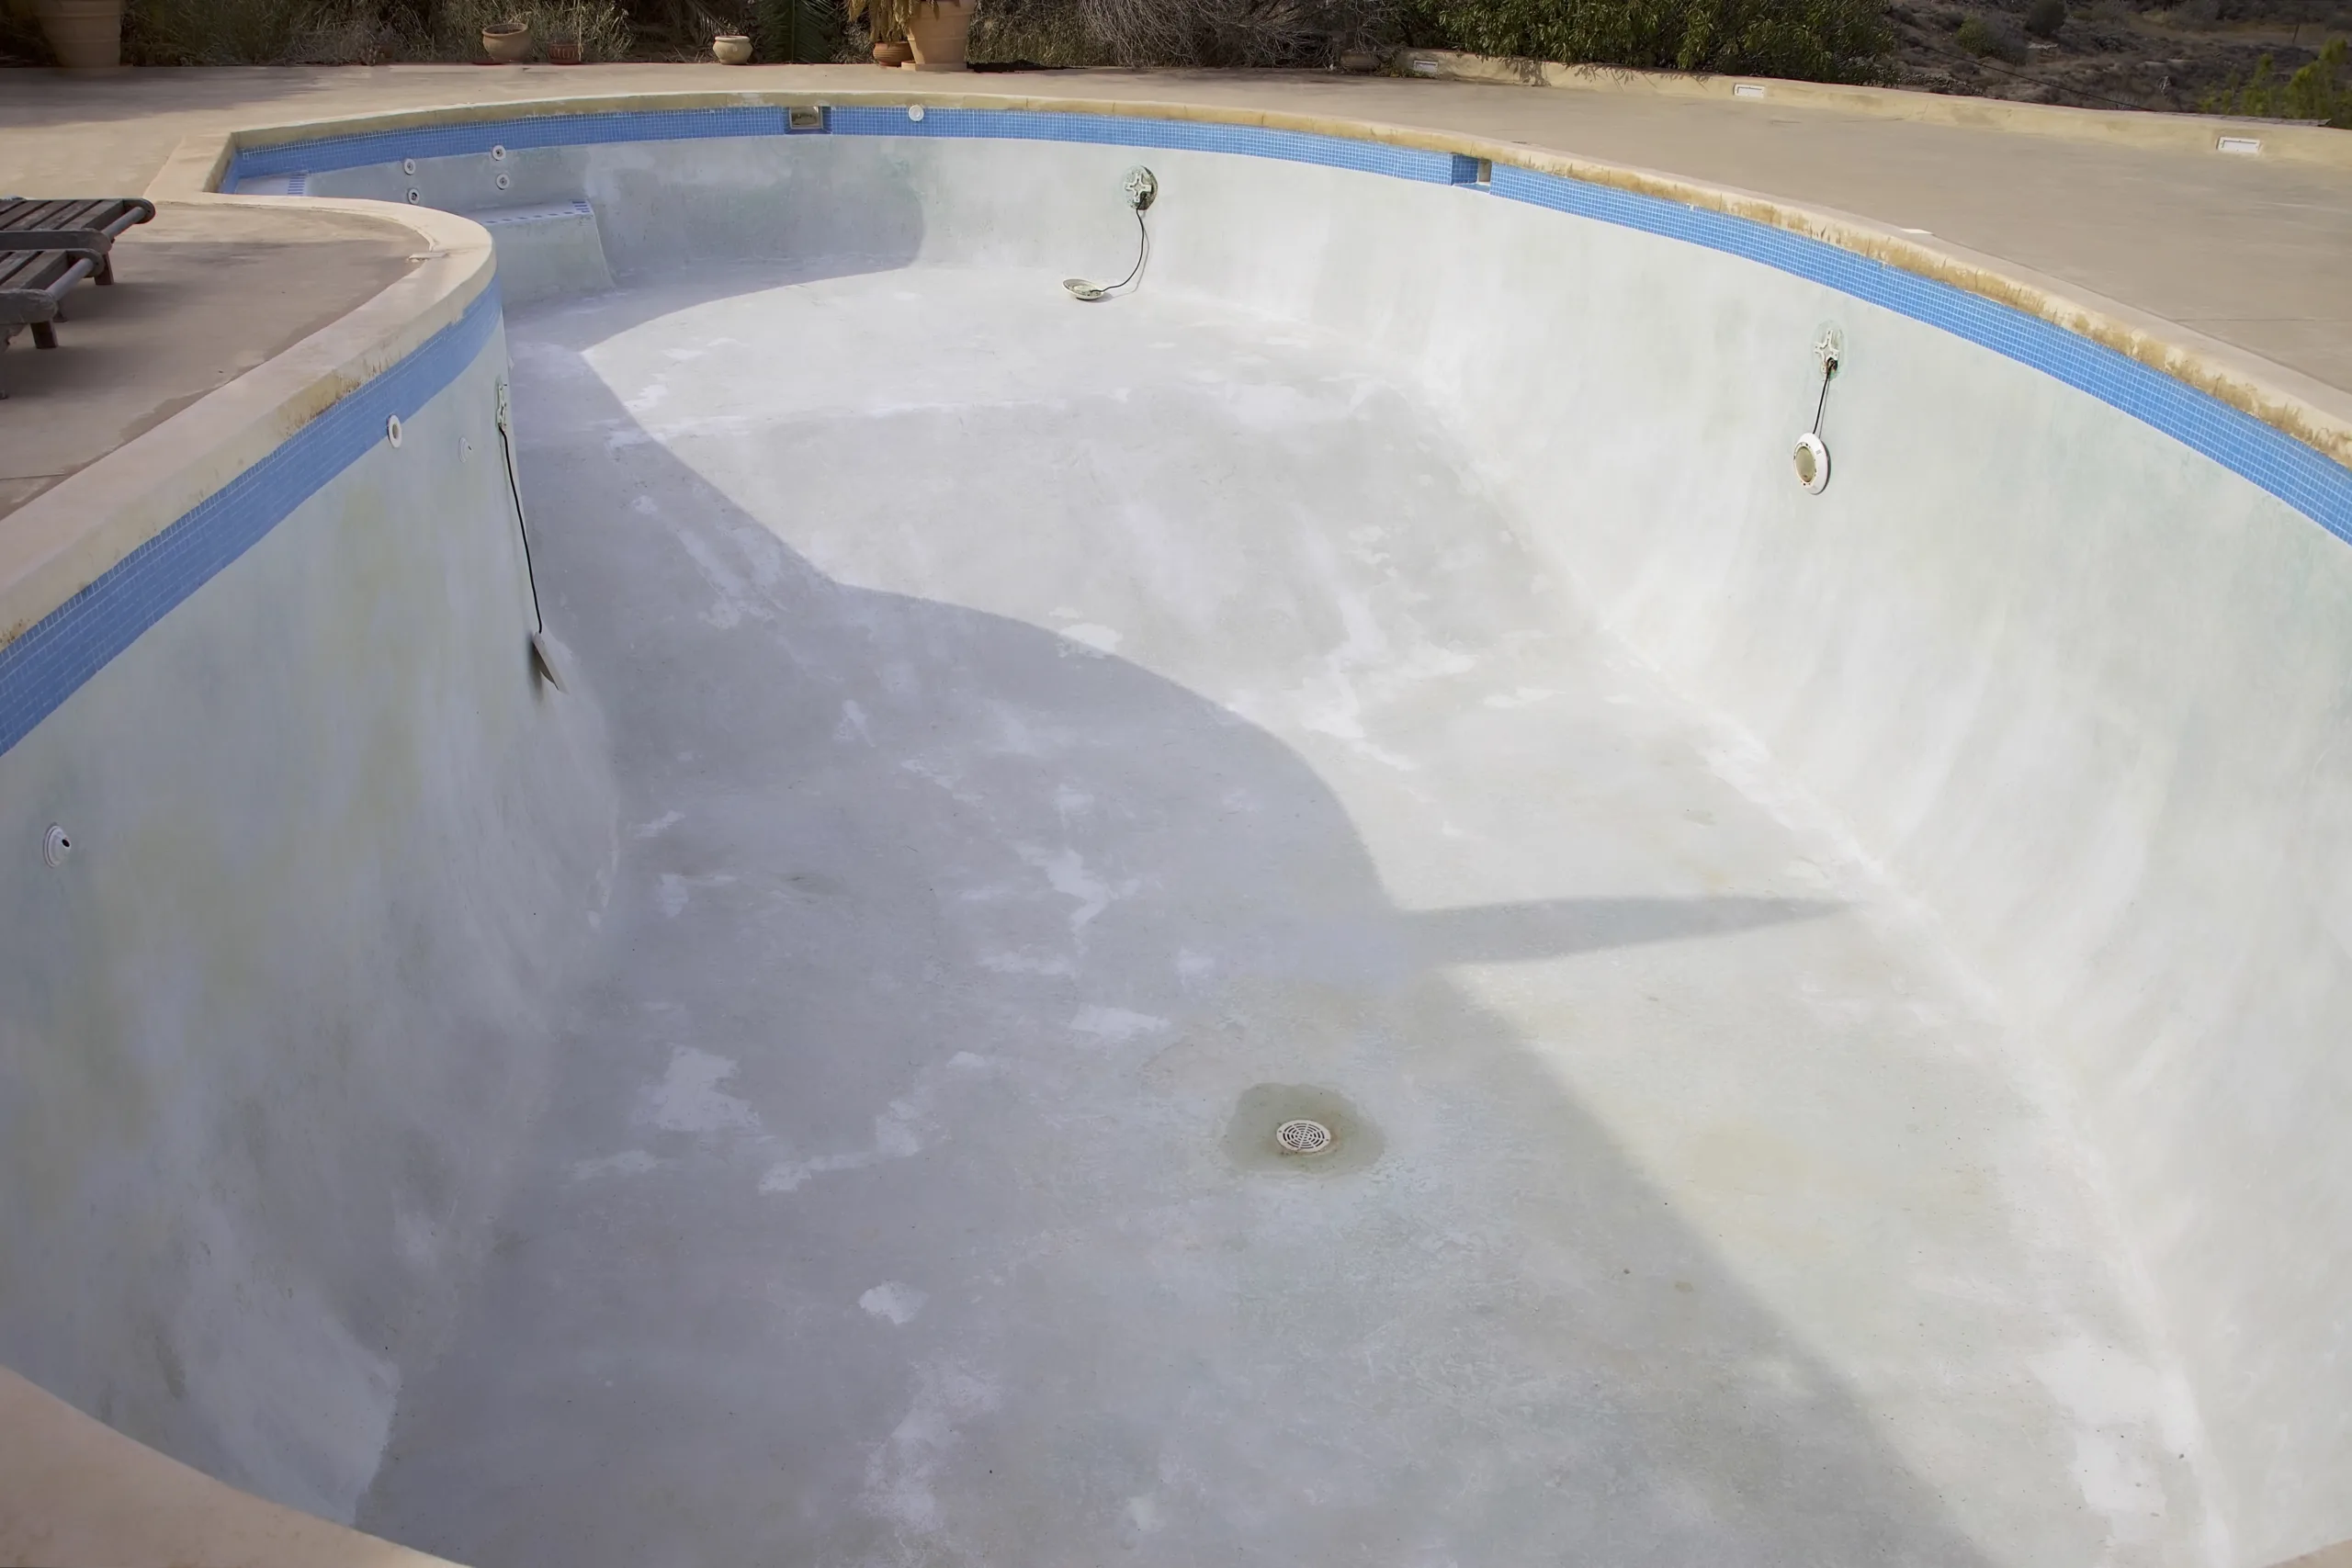 Featured Image for “Can I Paint My Pool Instead of Resurfacing?”